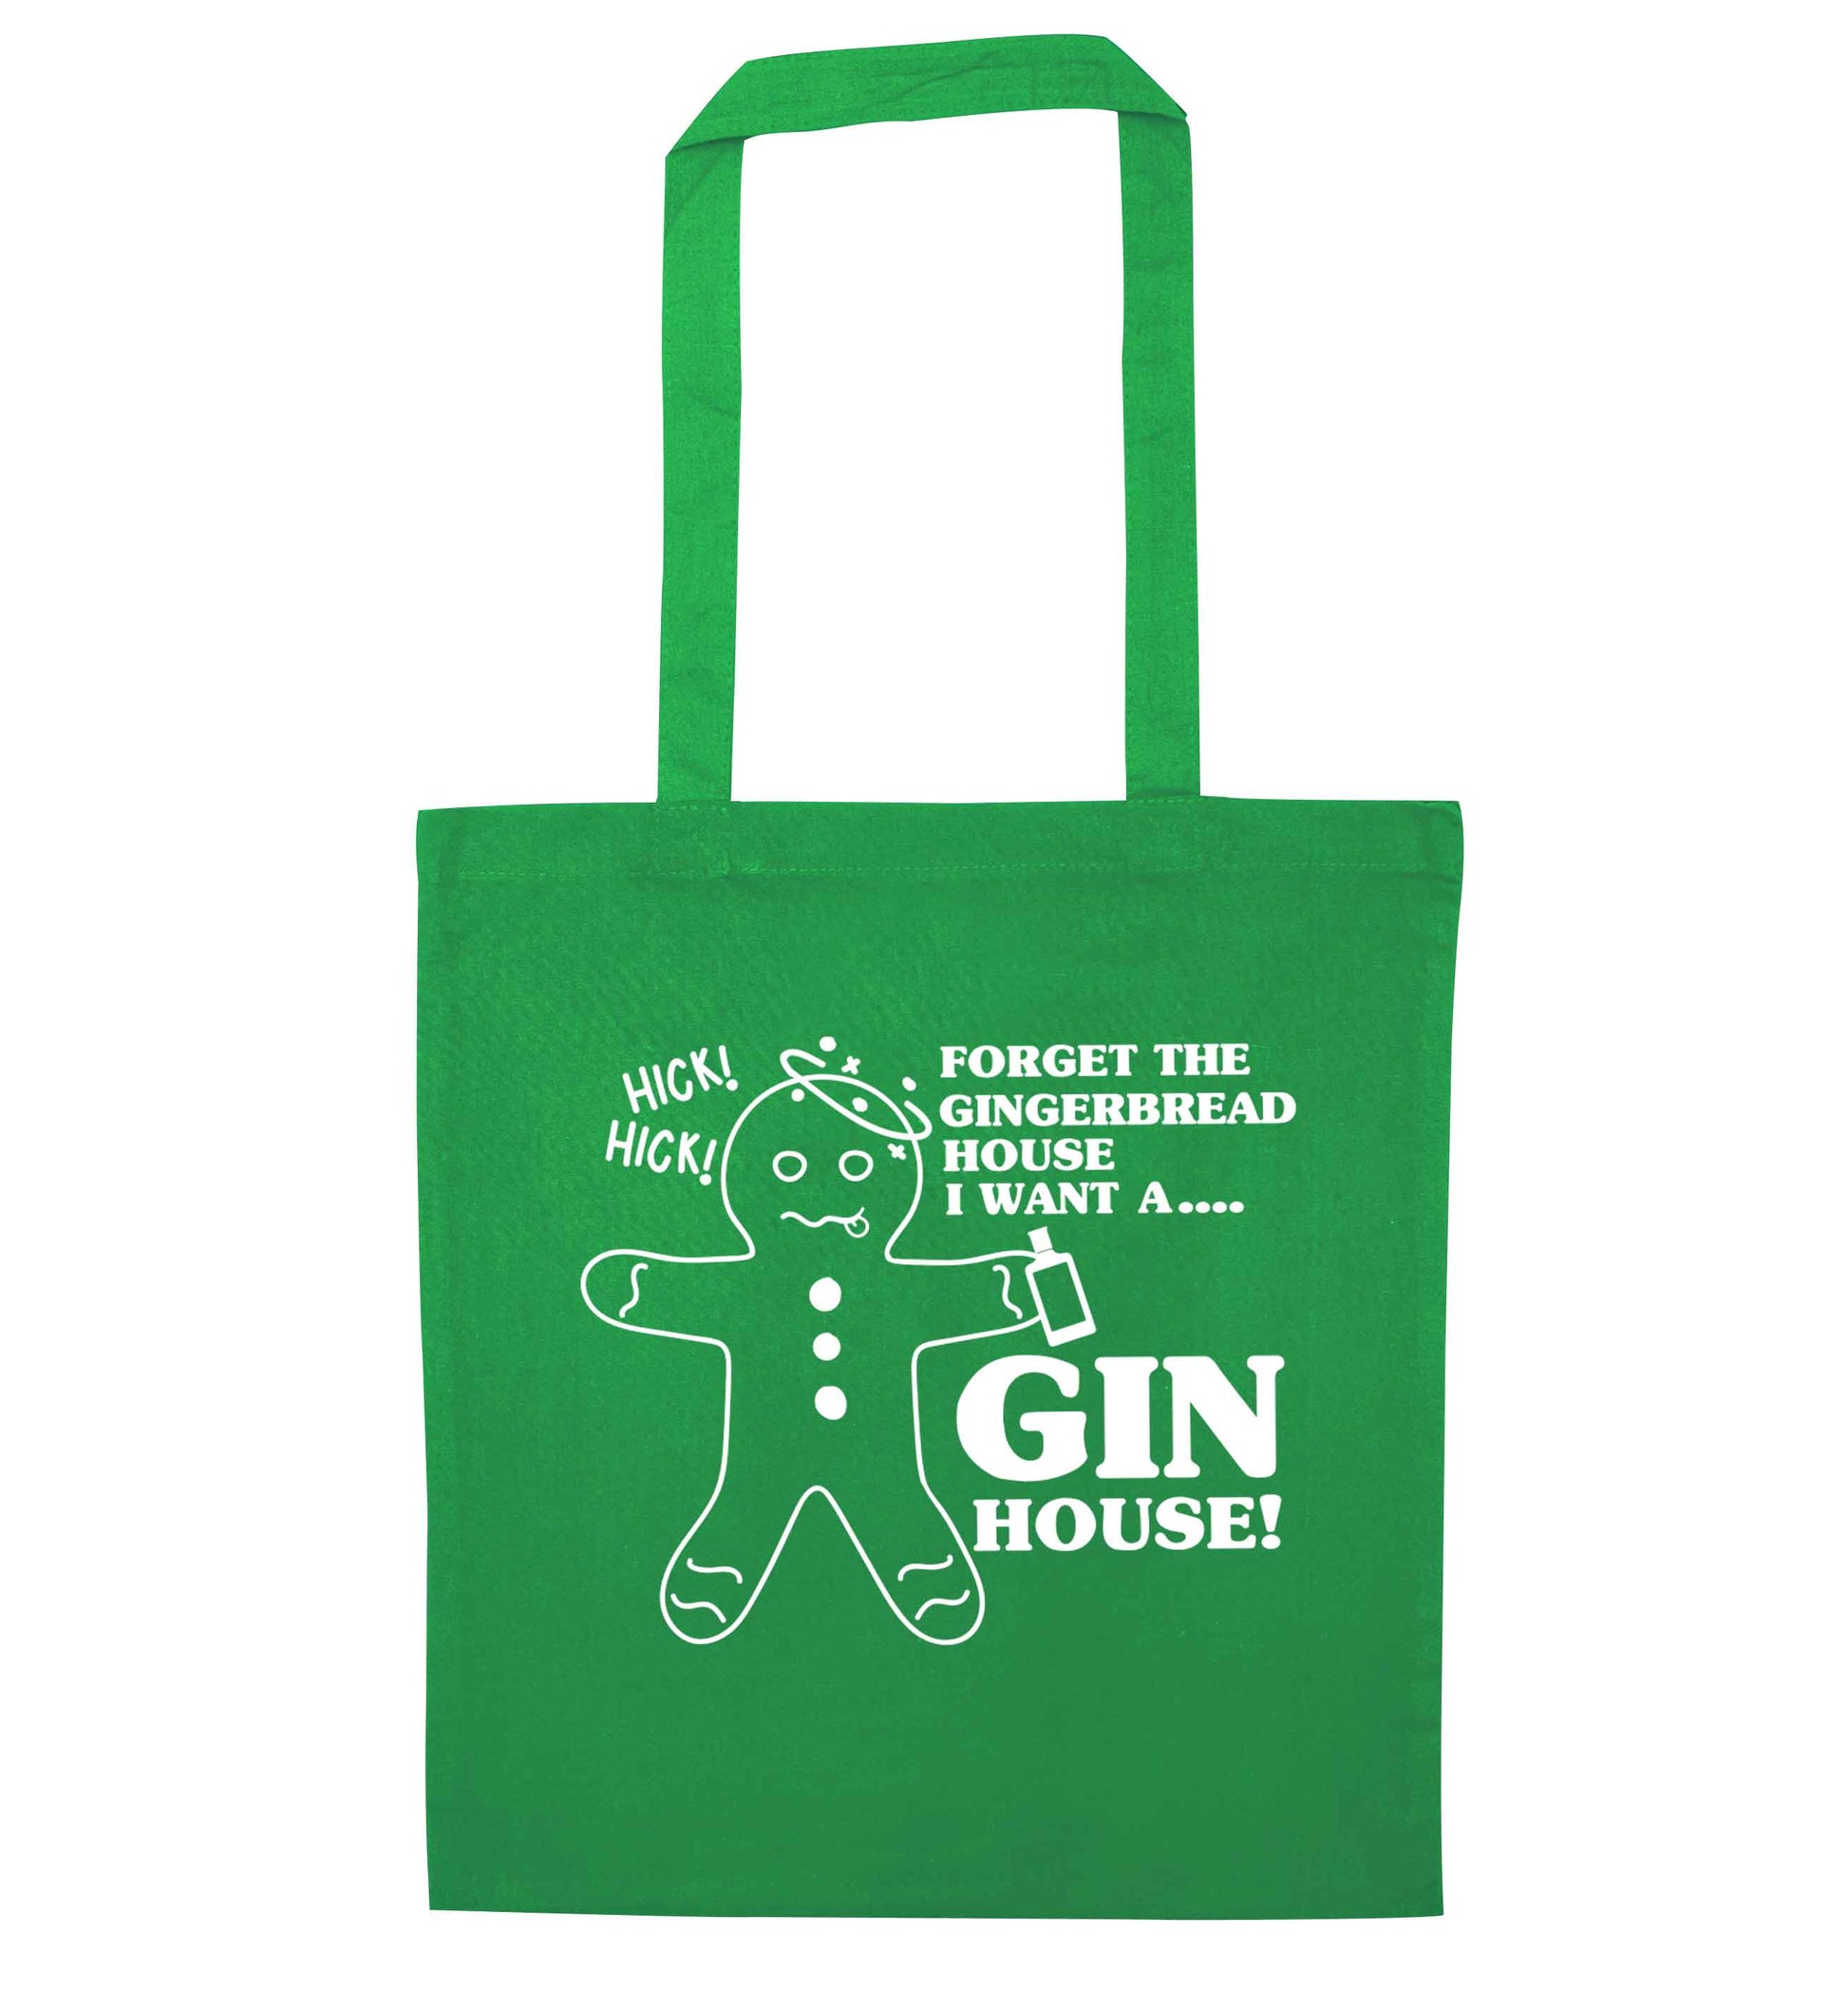 Forget the gingerbread house I want a gin house green tote bag